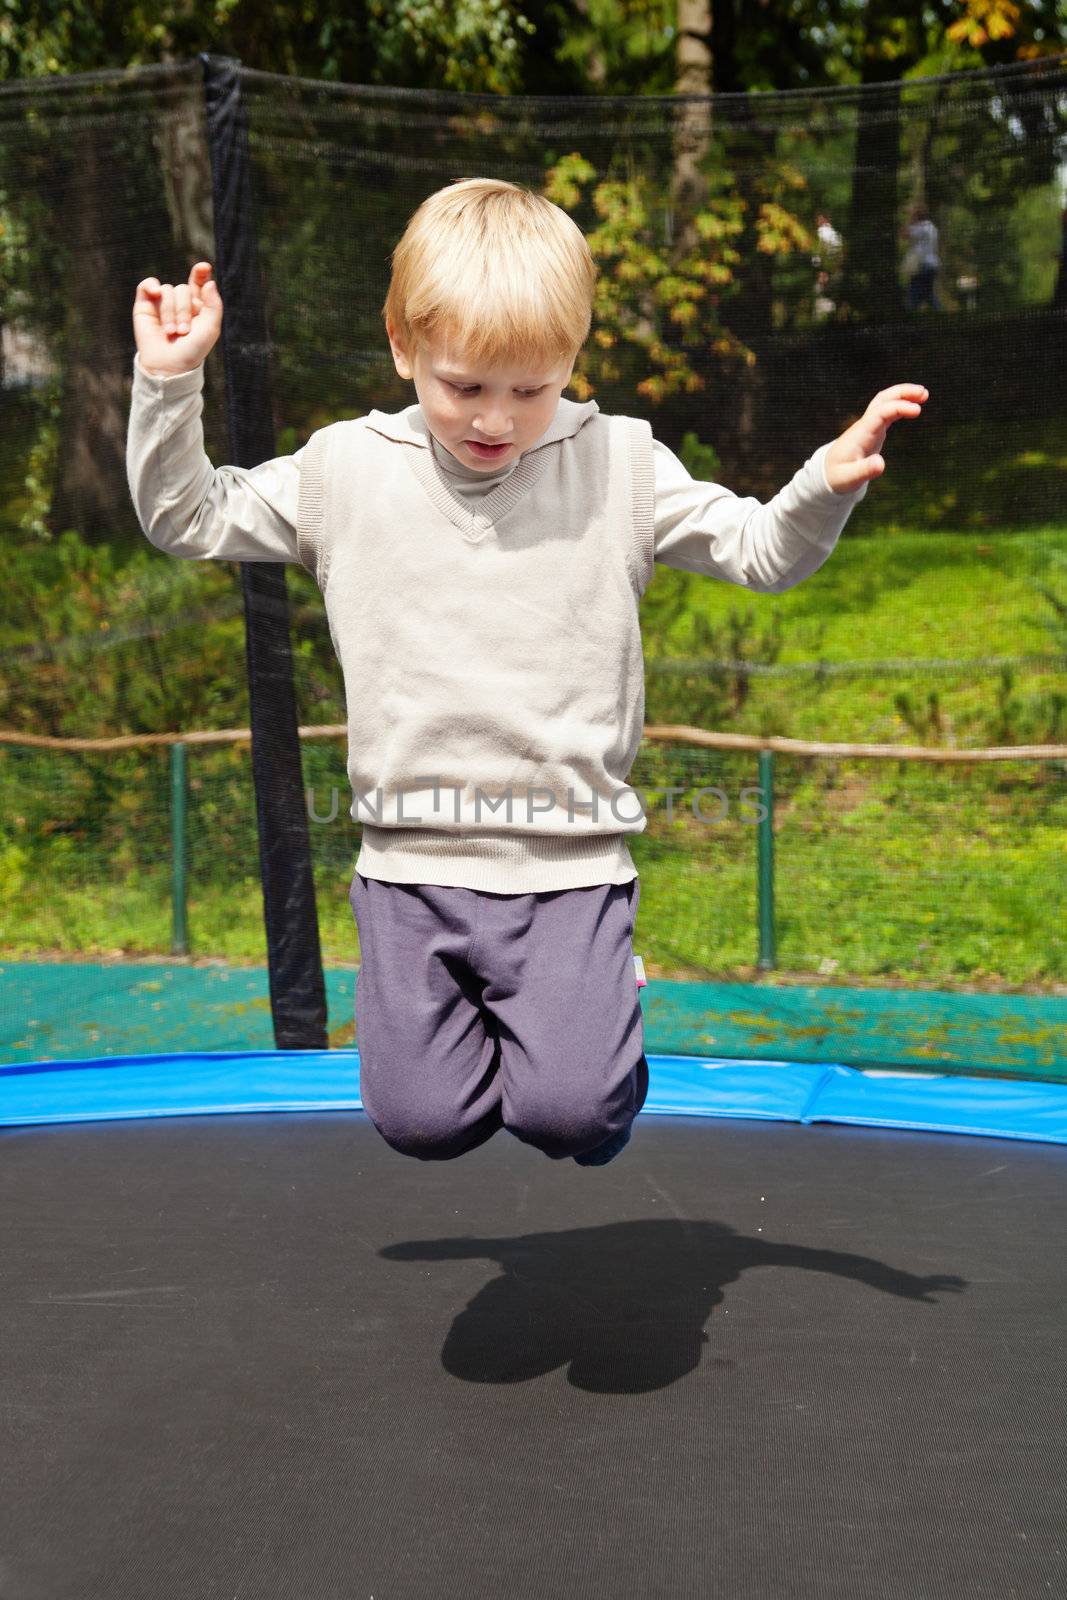 Blond boy jumping on trampolin at an outdoor playground